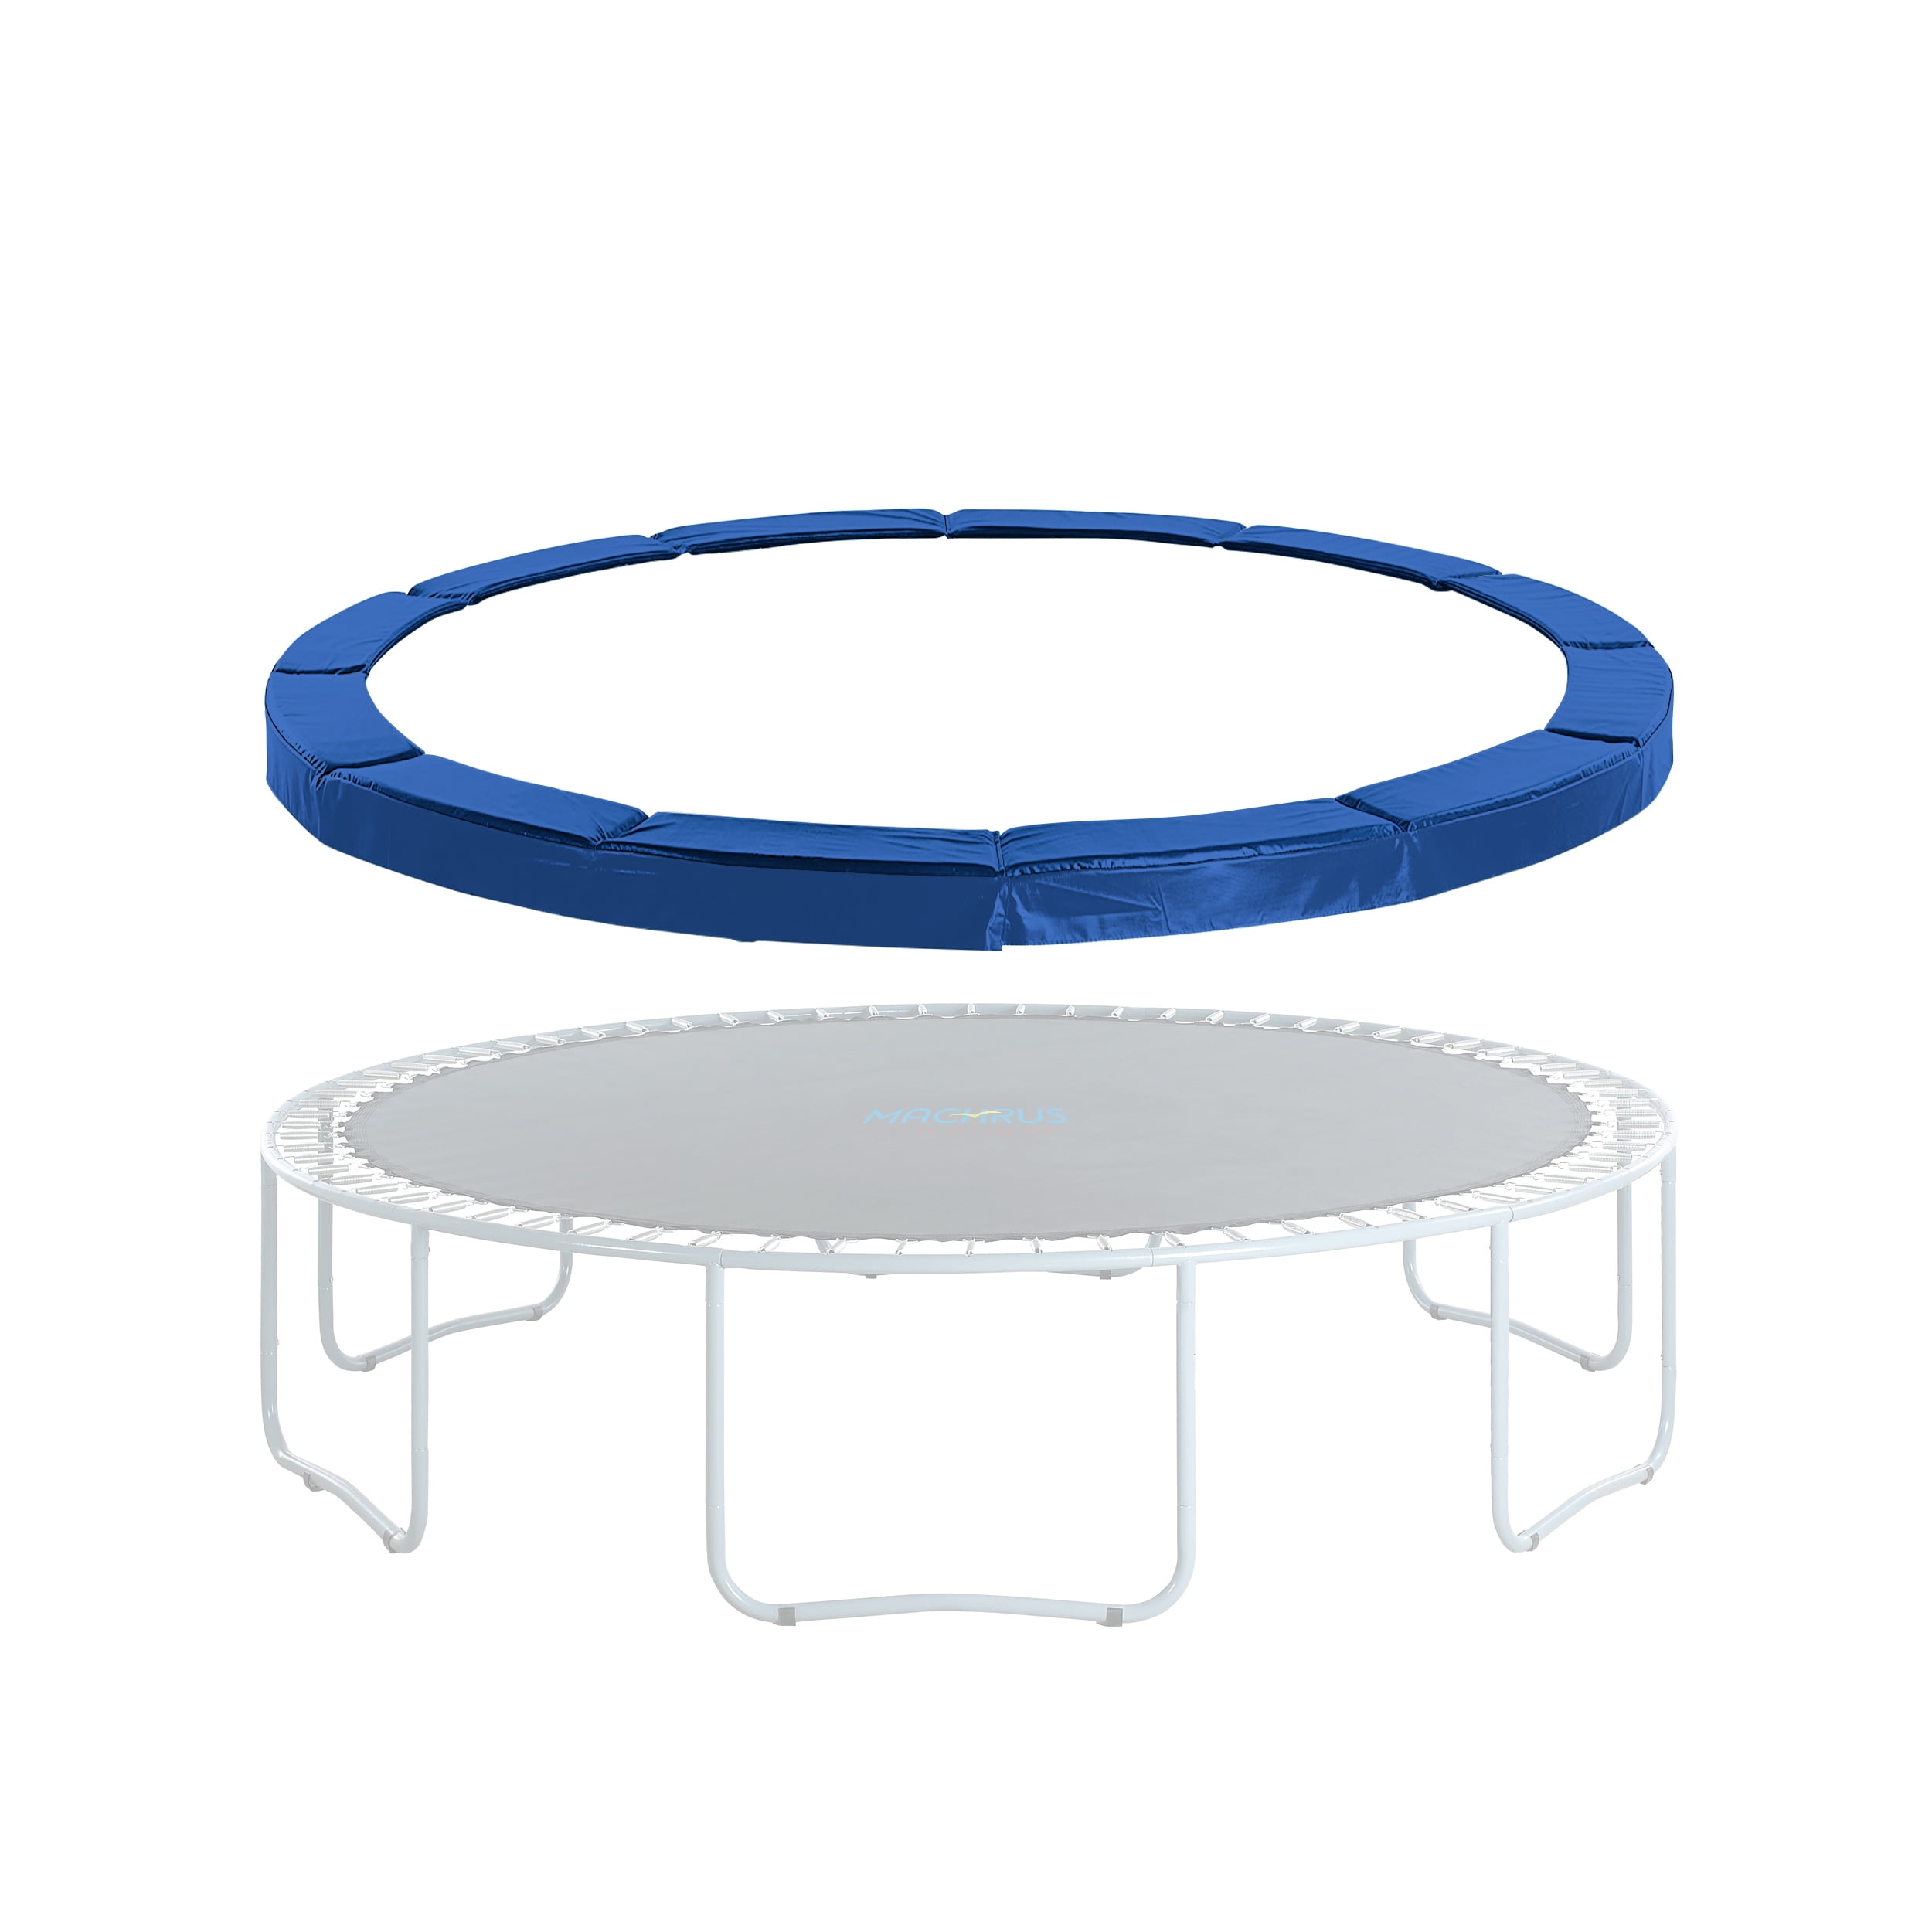 ExacMe Replacement Trampoline Pad, Safety Spring Cover Frame Pad 8 10